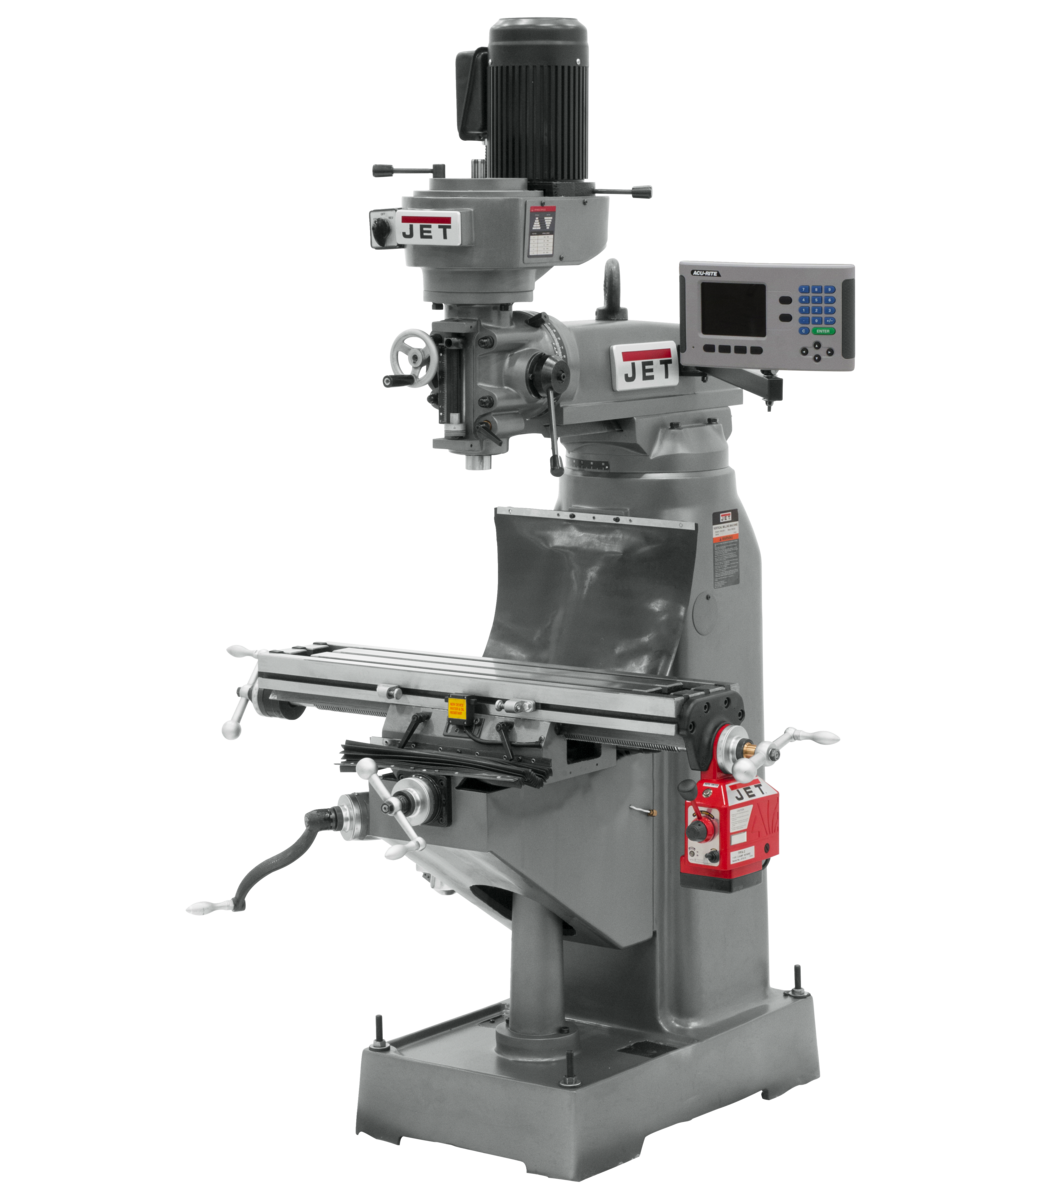 JVM-836-3 Mill With 3-Axis ACU-RITE 203 DRO (Knee) With X and Y-Axis Powerfeeds